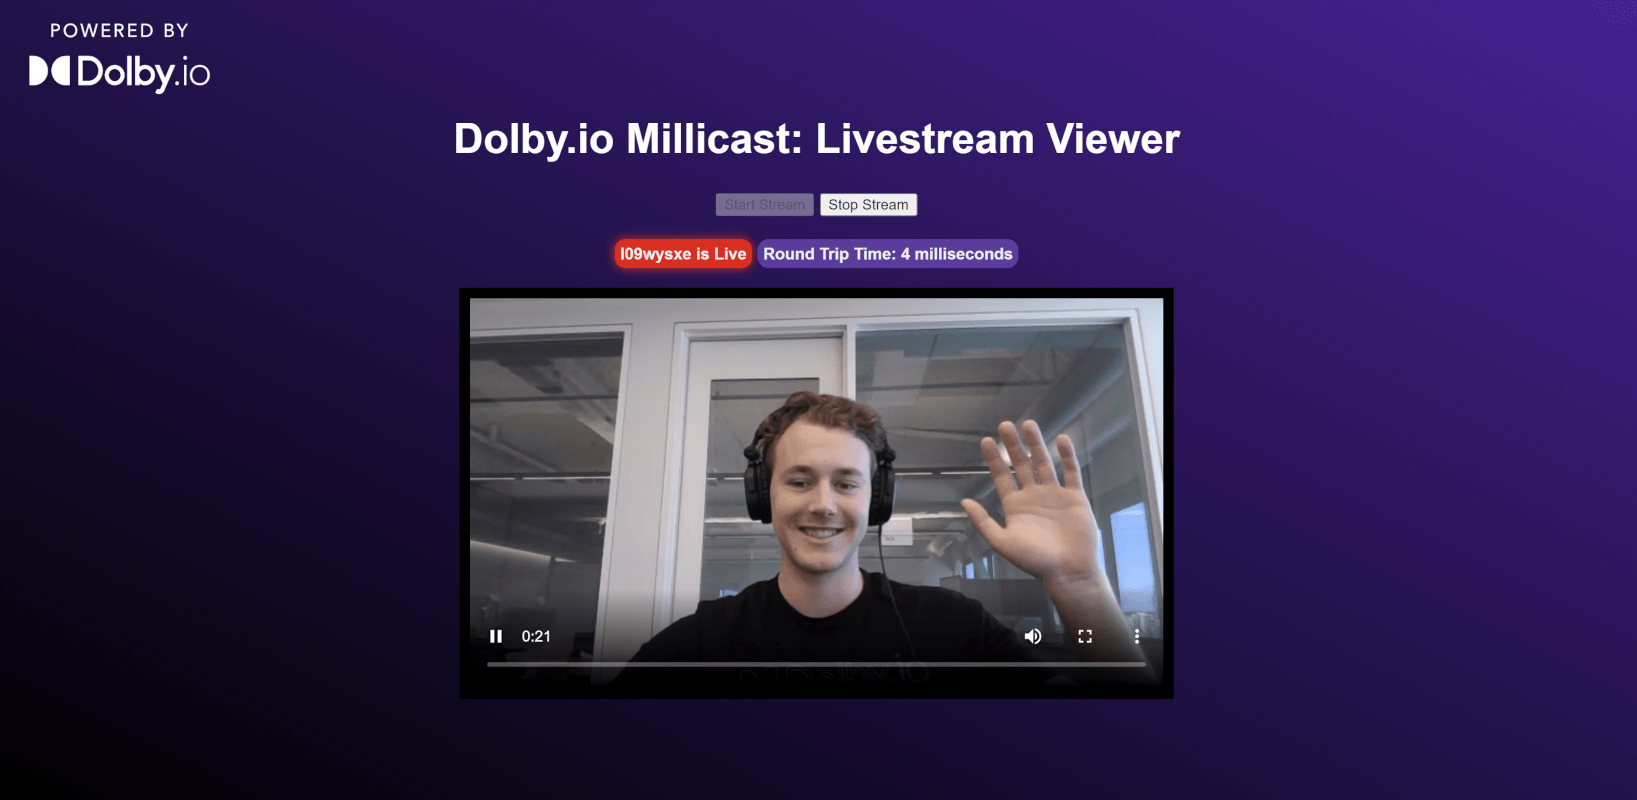 Once users log into the Livestream viewer they connect to a low-latency webRTC stream powered by Dolby.io Millicast.